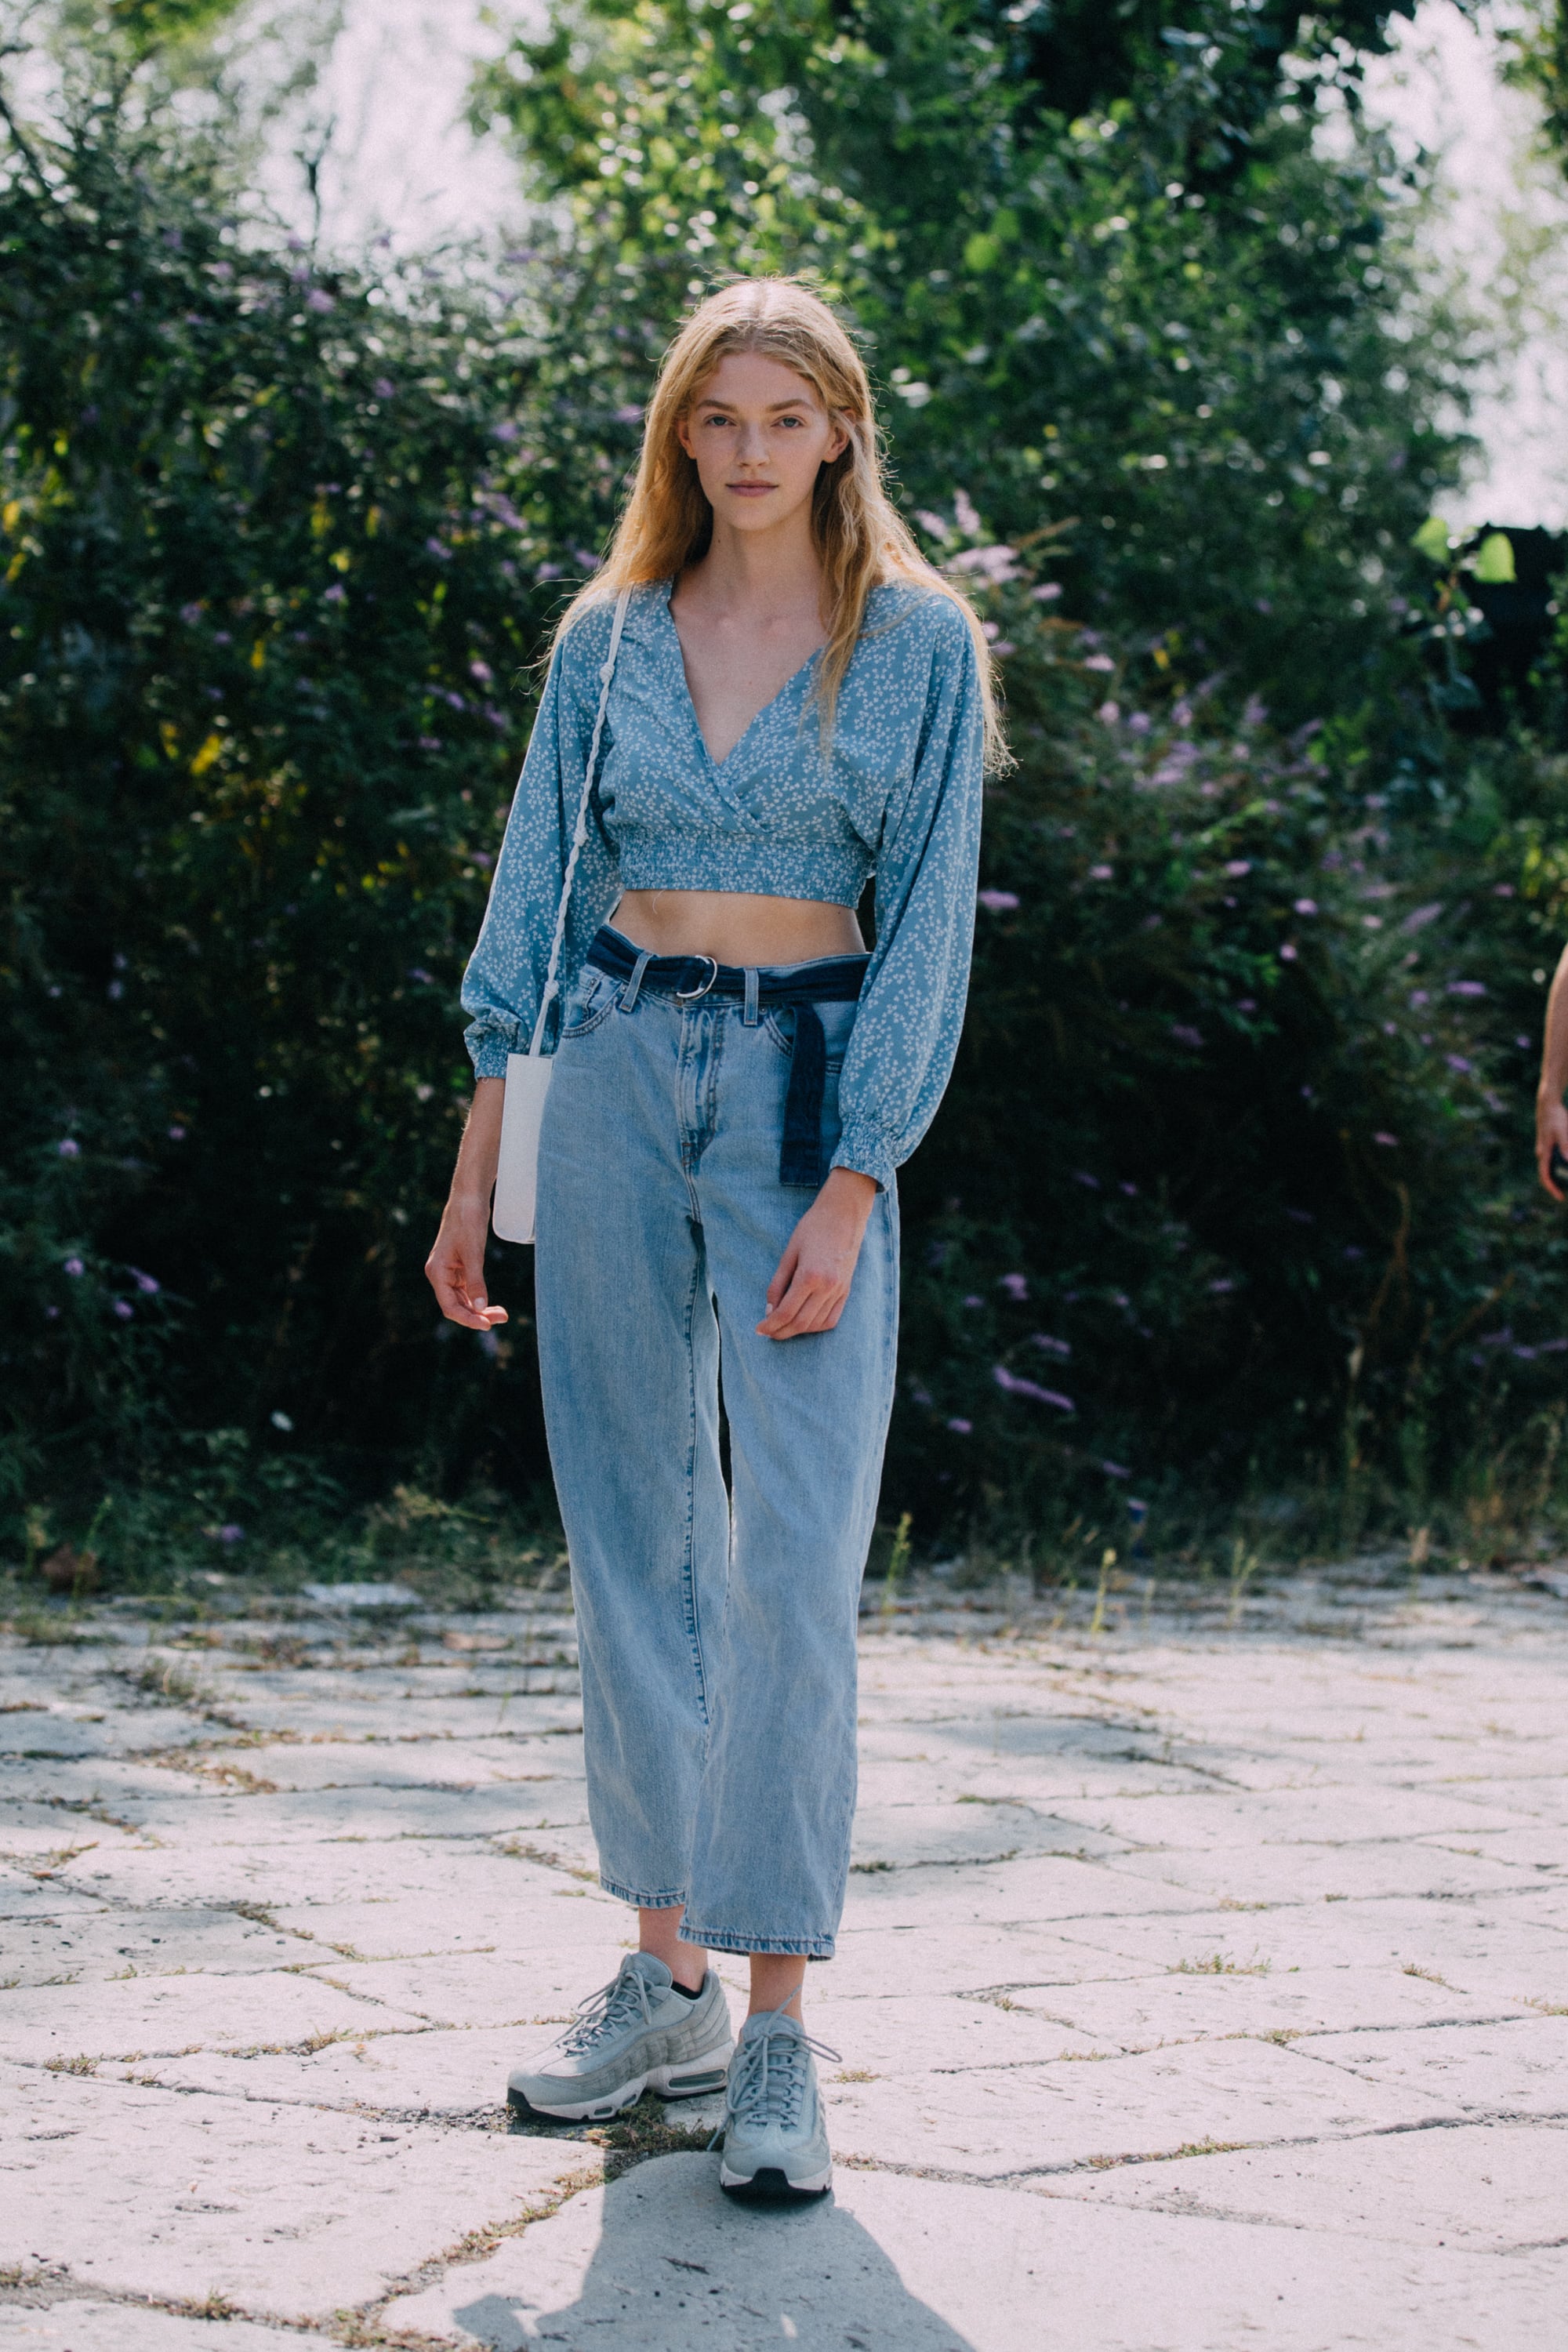 denim inspired outfits